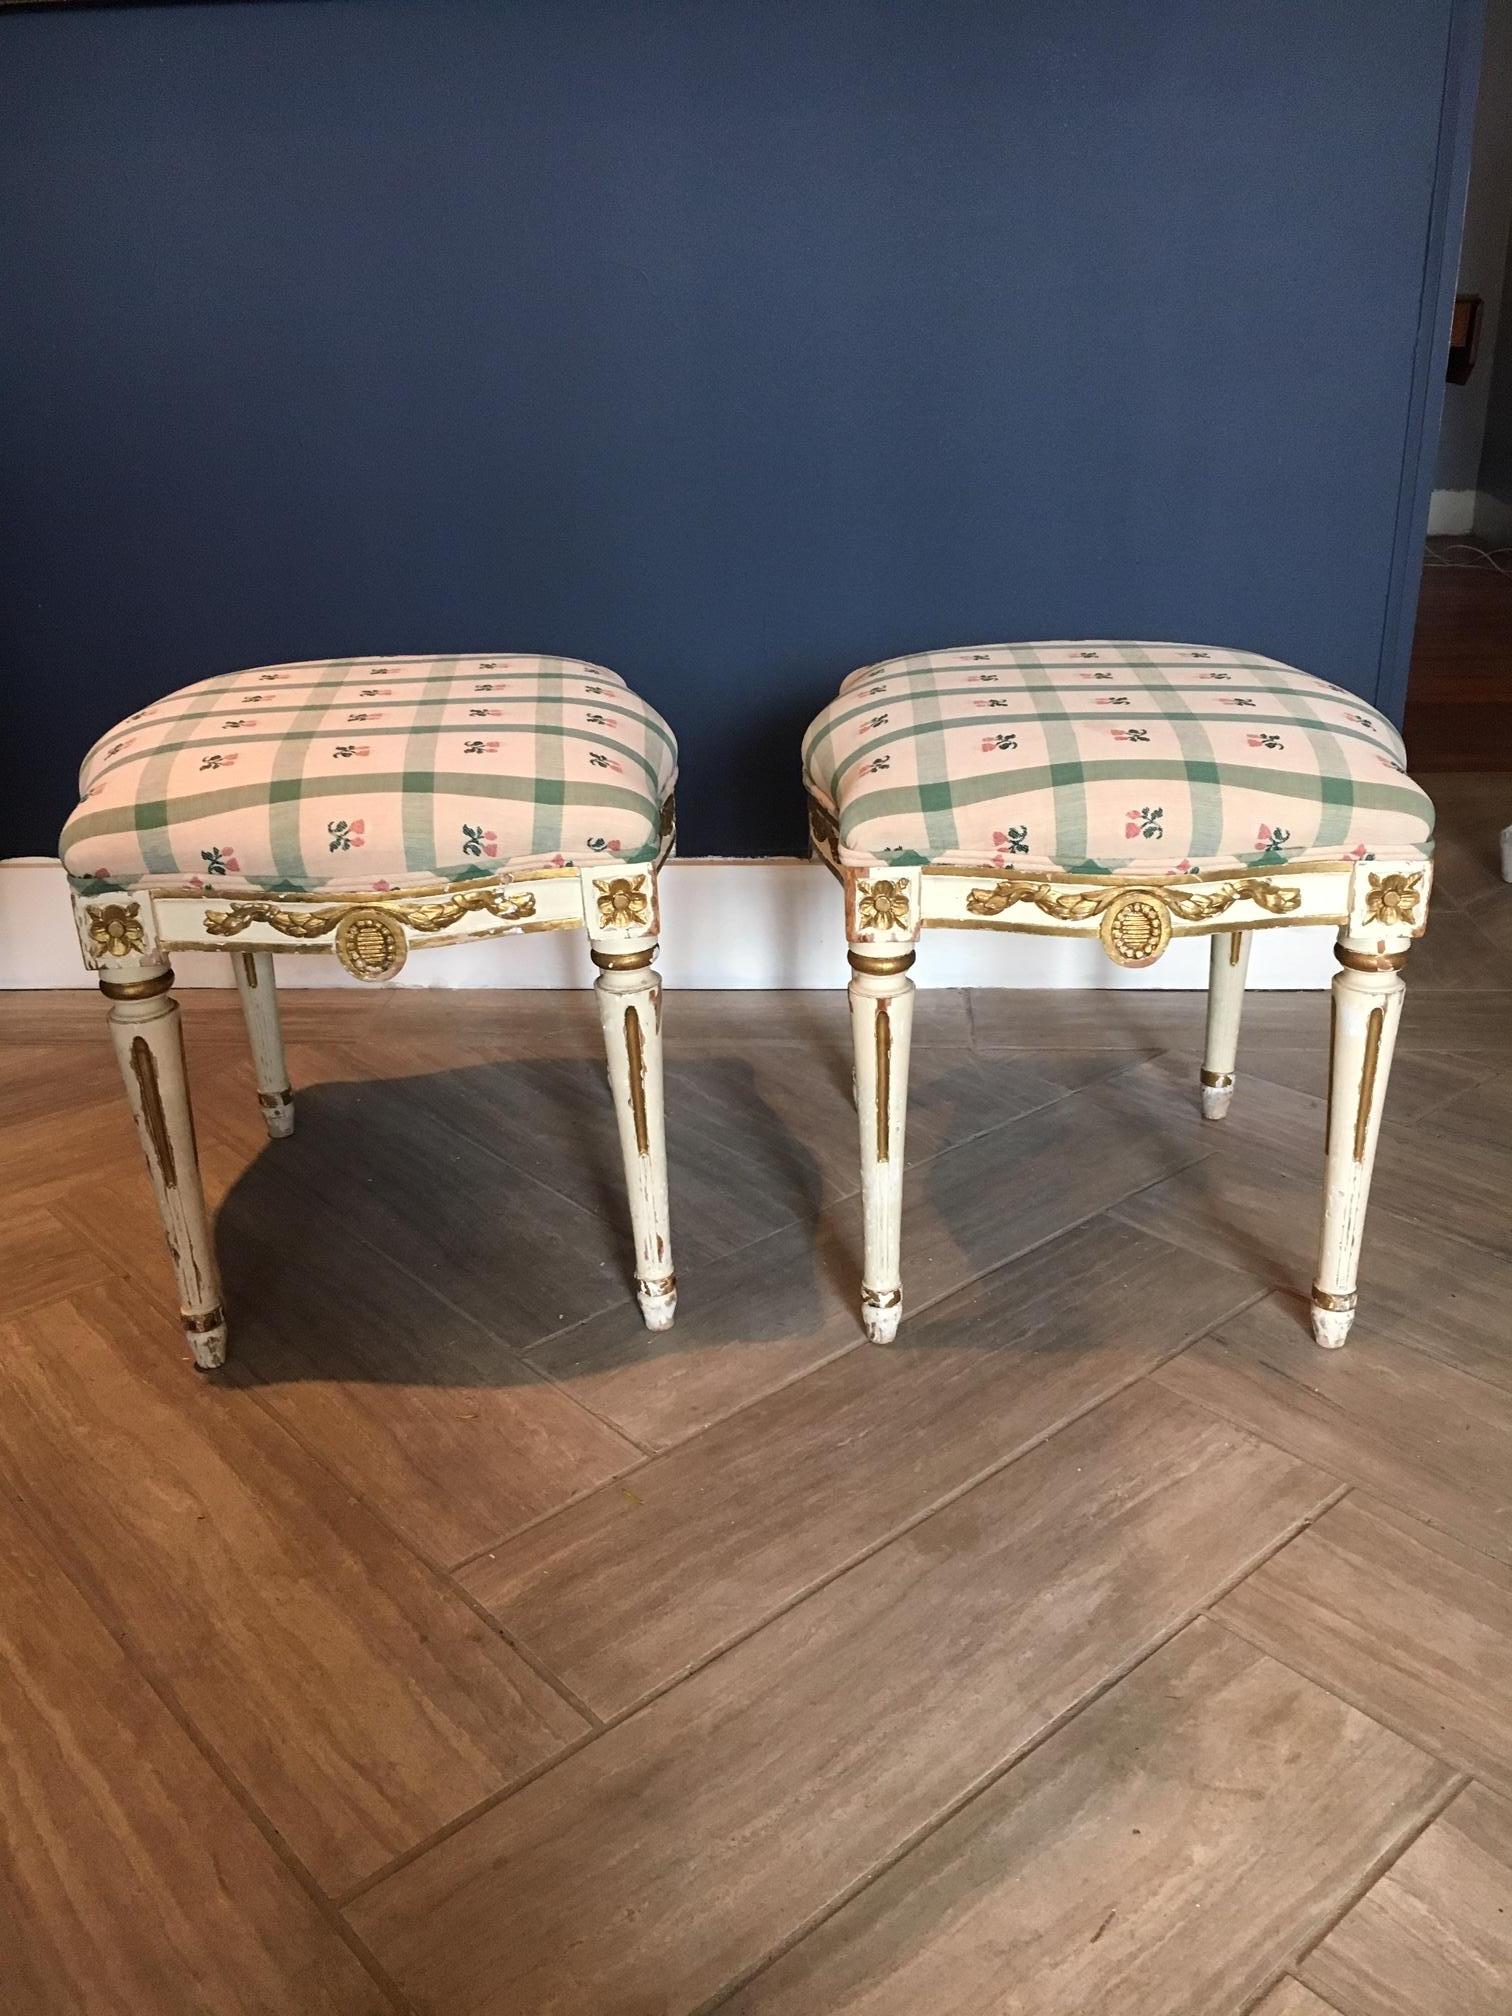 Gorgeous pair of Swedish stools/ tabourets, painted and parcel gilt, in the Gustavian / Louis XVI style, 19th century. Medallion motifs. 

Forms a set with pair of side chairs/ salon chairs, sold separately.